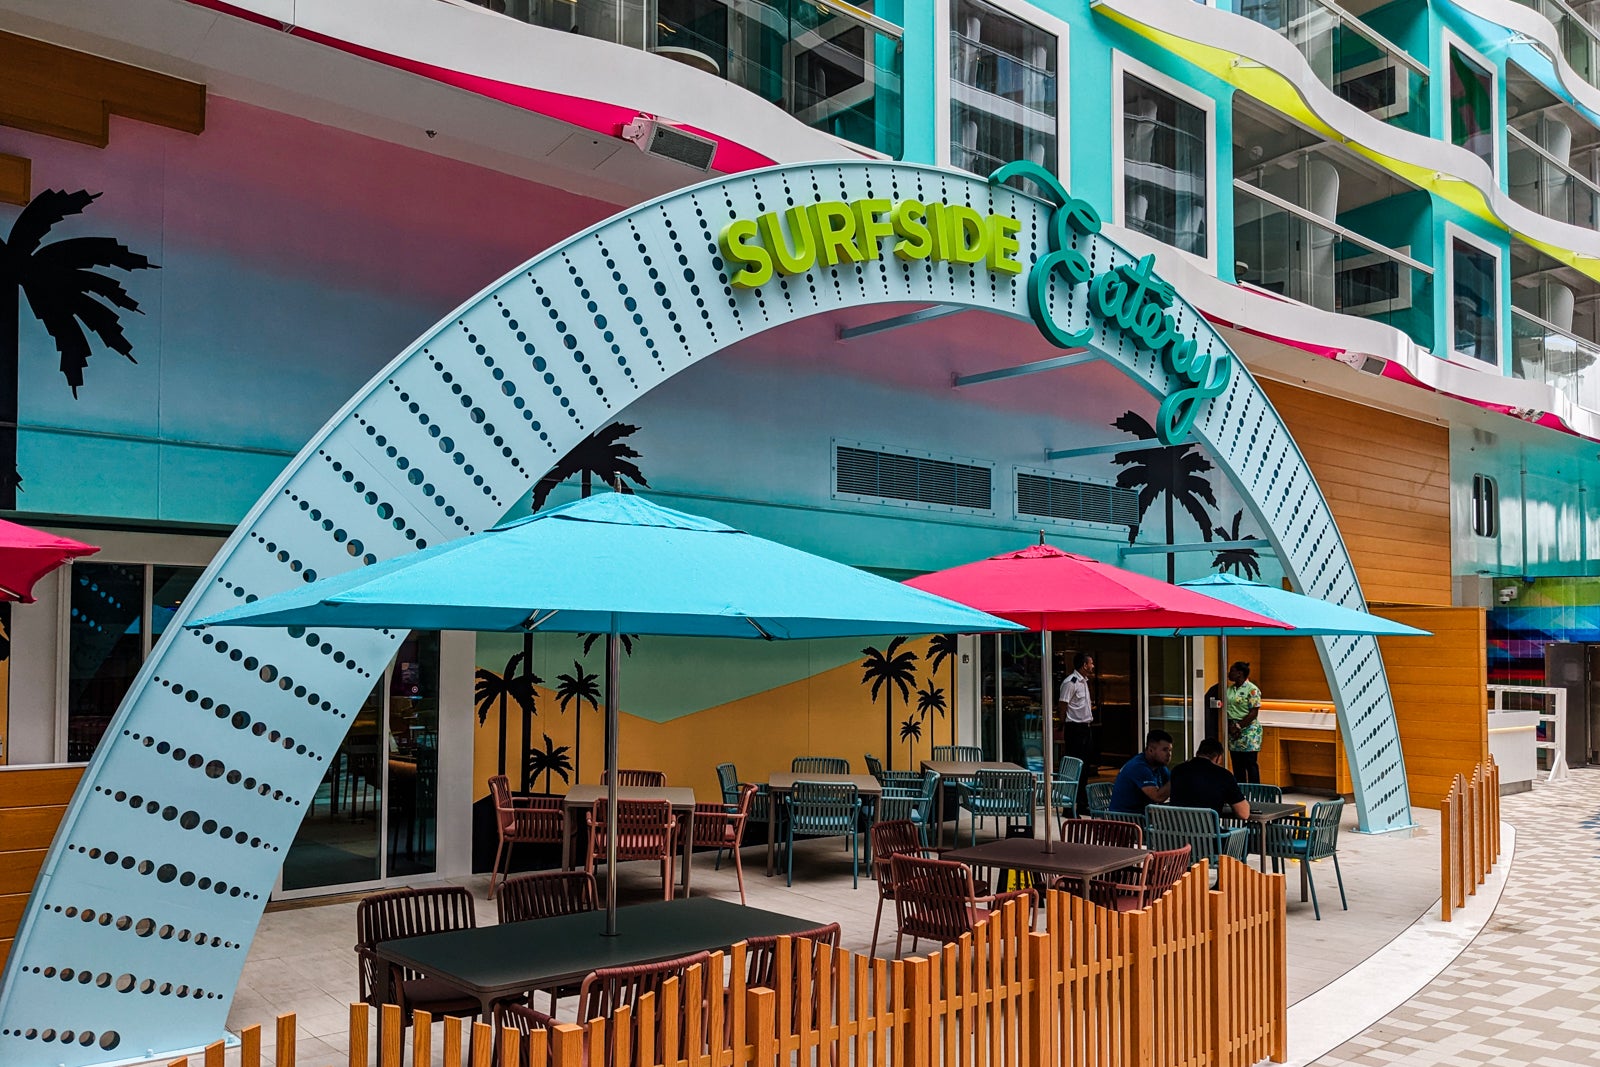 Archway reading Surfside Eatery over outdoor seating by restaurant entrance on Icon of the Seas